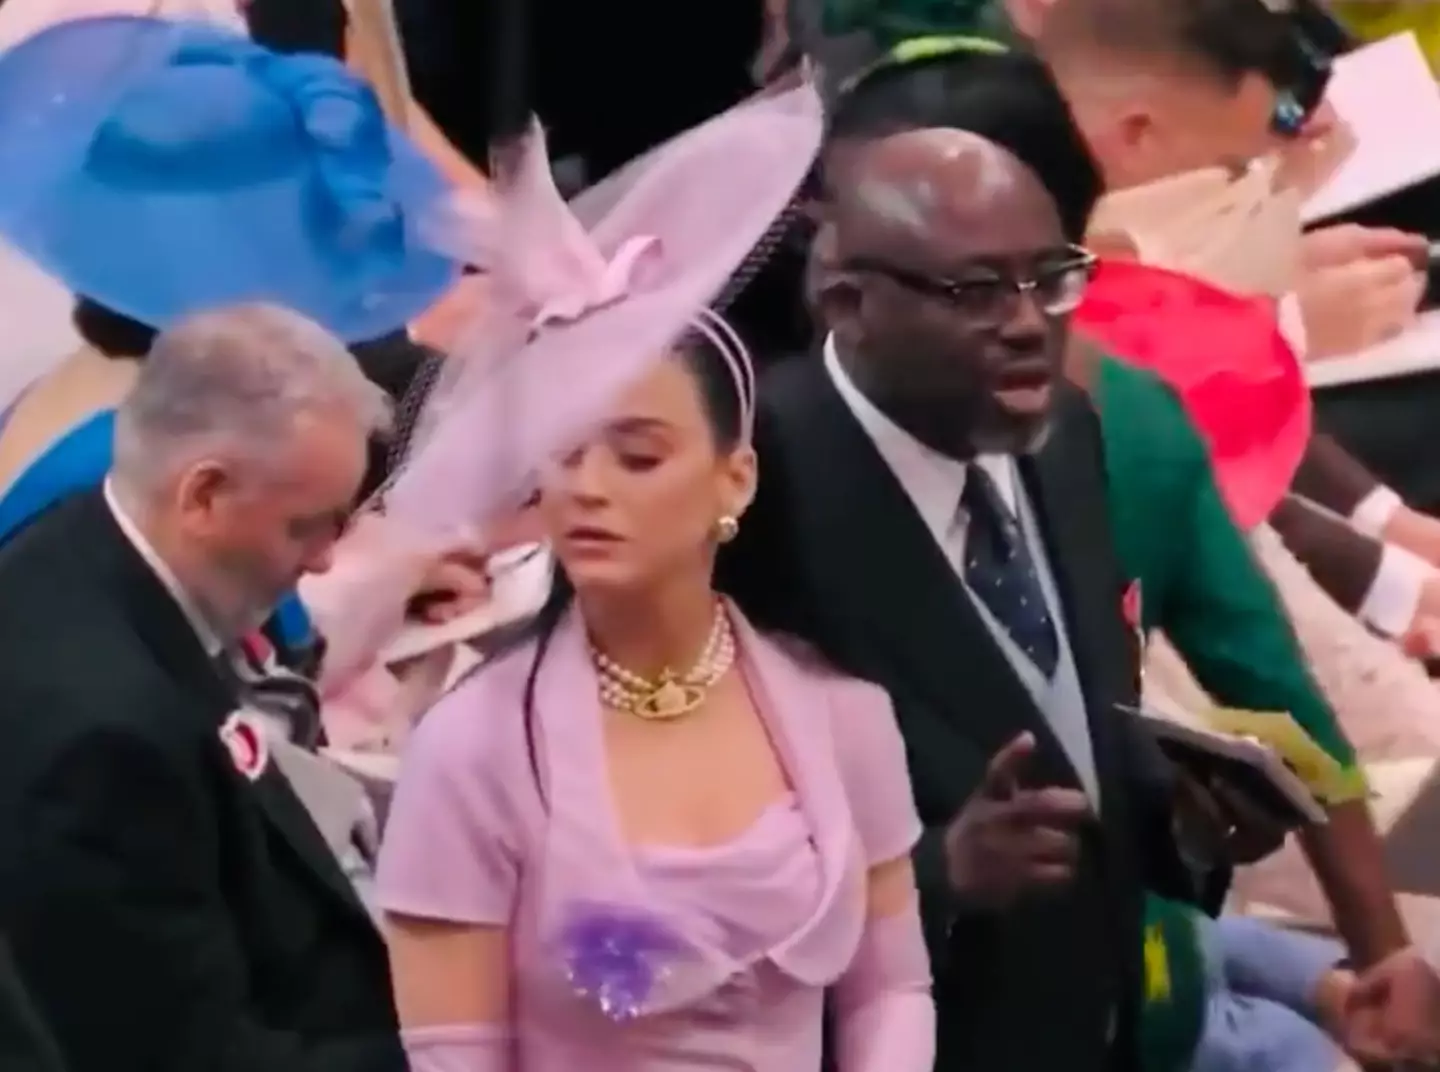 Katy Perry has left viewers in stitches as she struggles to find a seat at Westminster Abbey during King Charles III's historical coronation today (6 May).